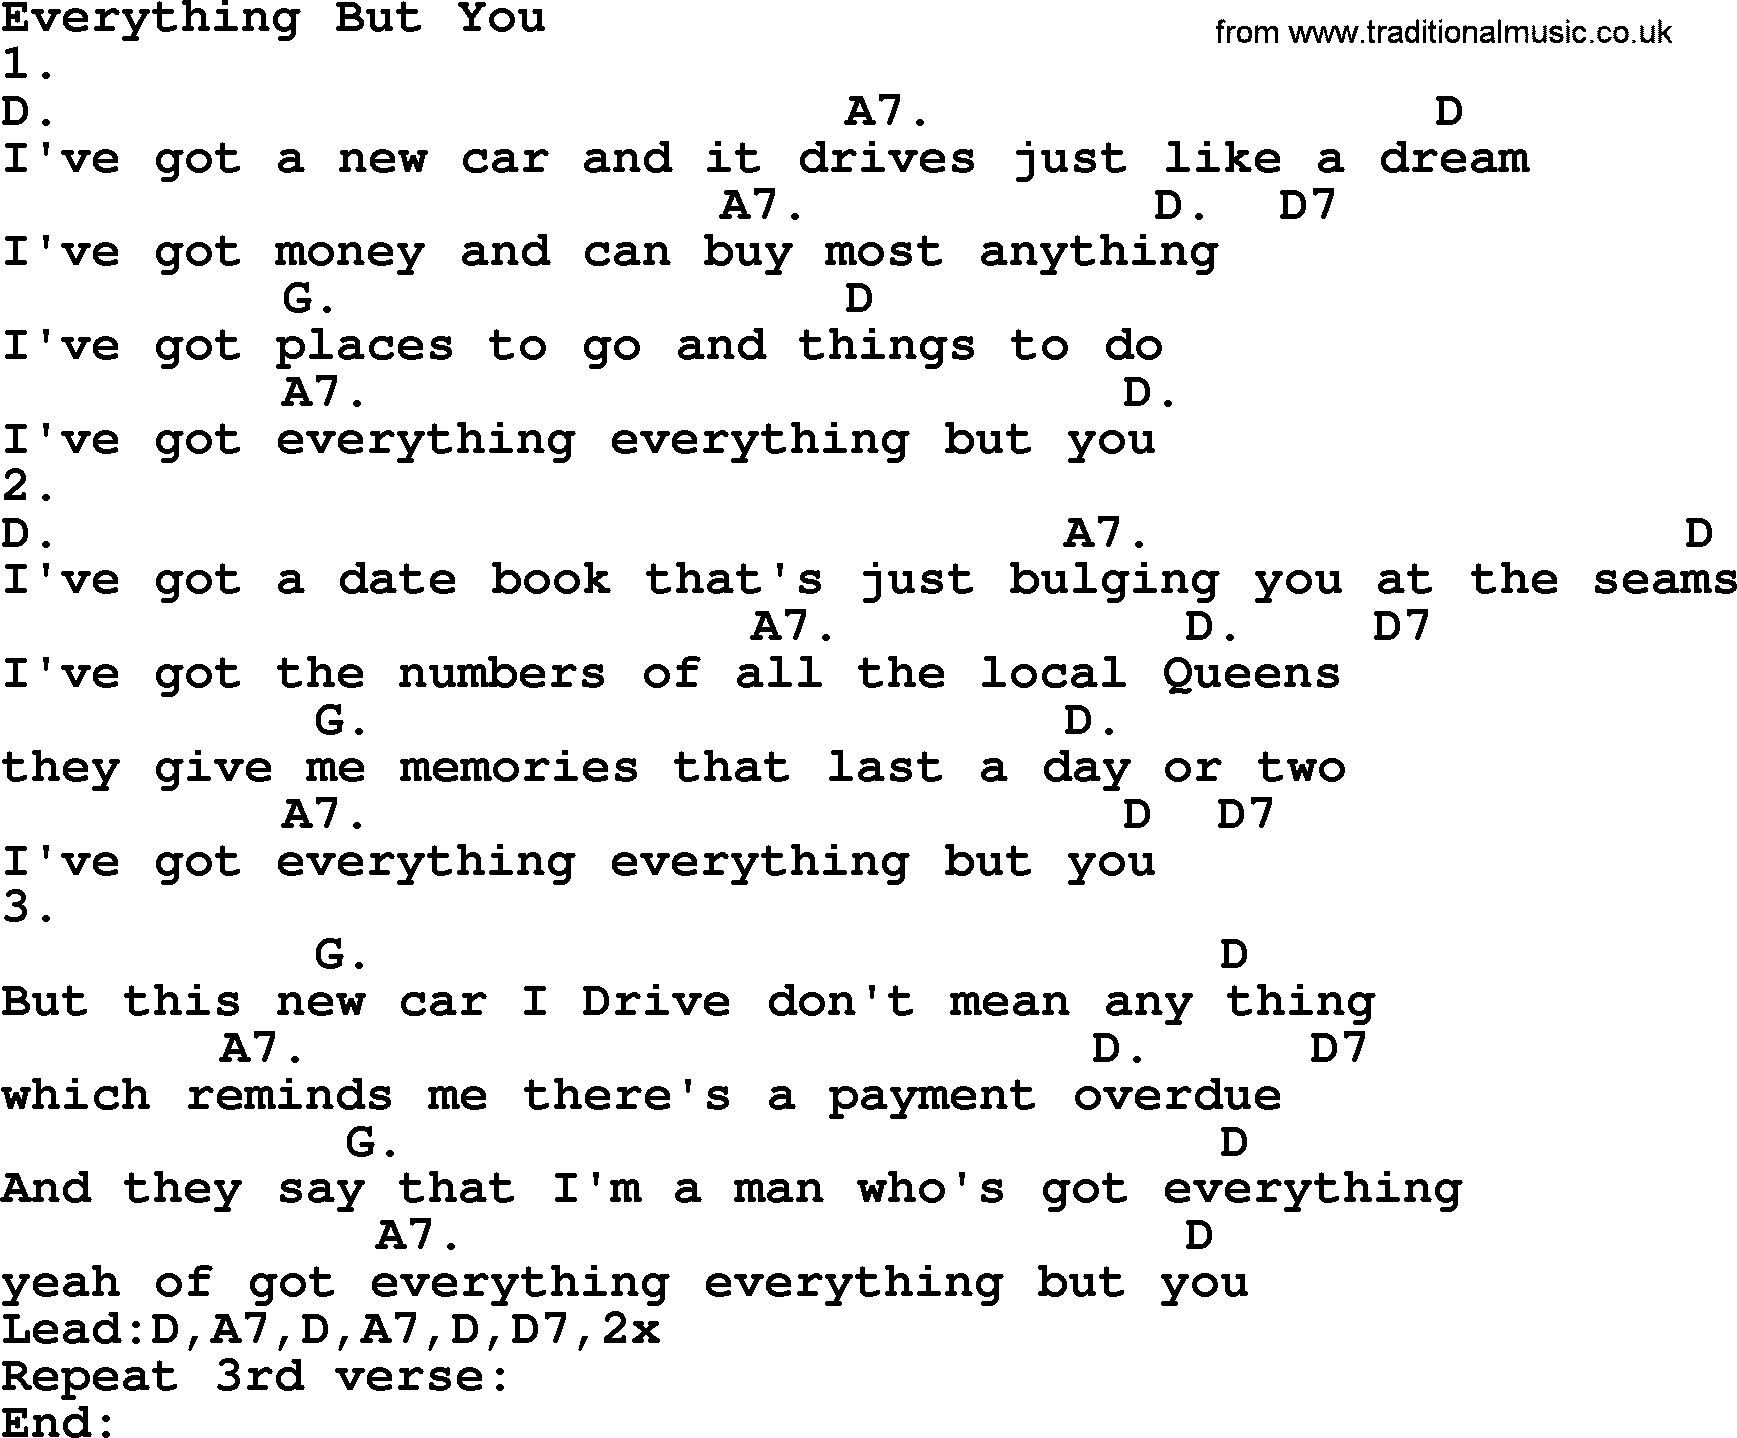 Willie Nelson song: Everything But You, lyrics and chords